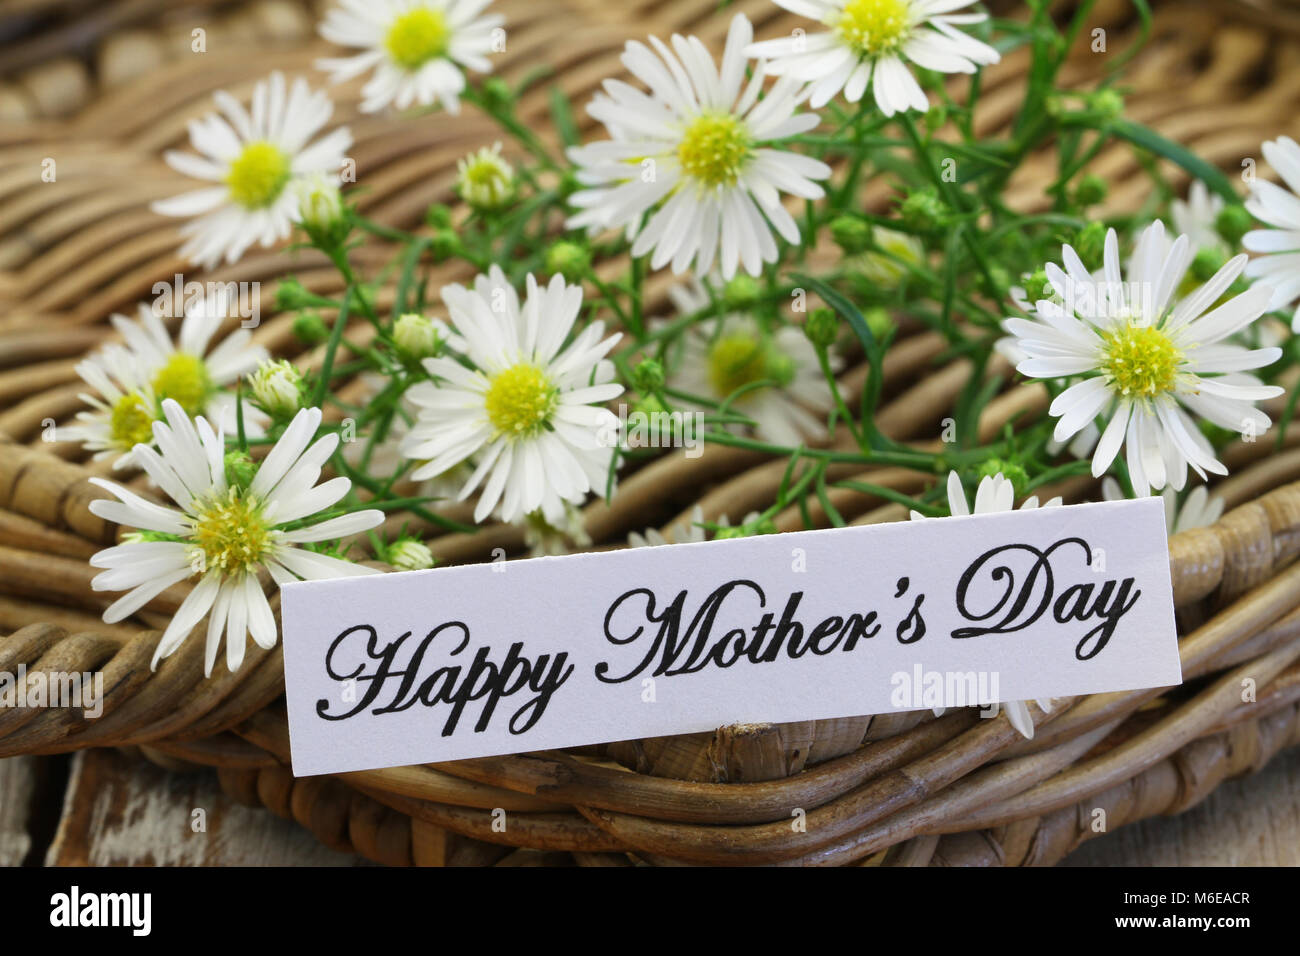 Happy Mother's day card with chamomile flowers on wicker tray Stock Photo